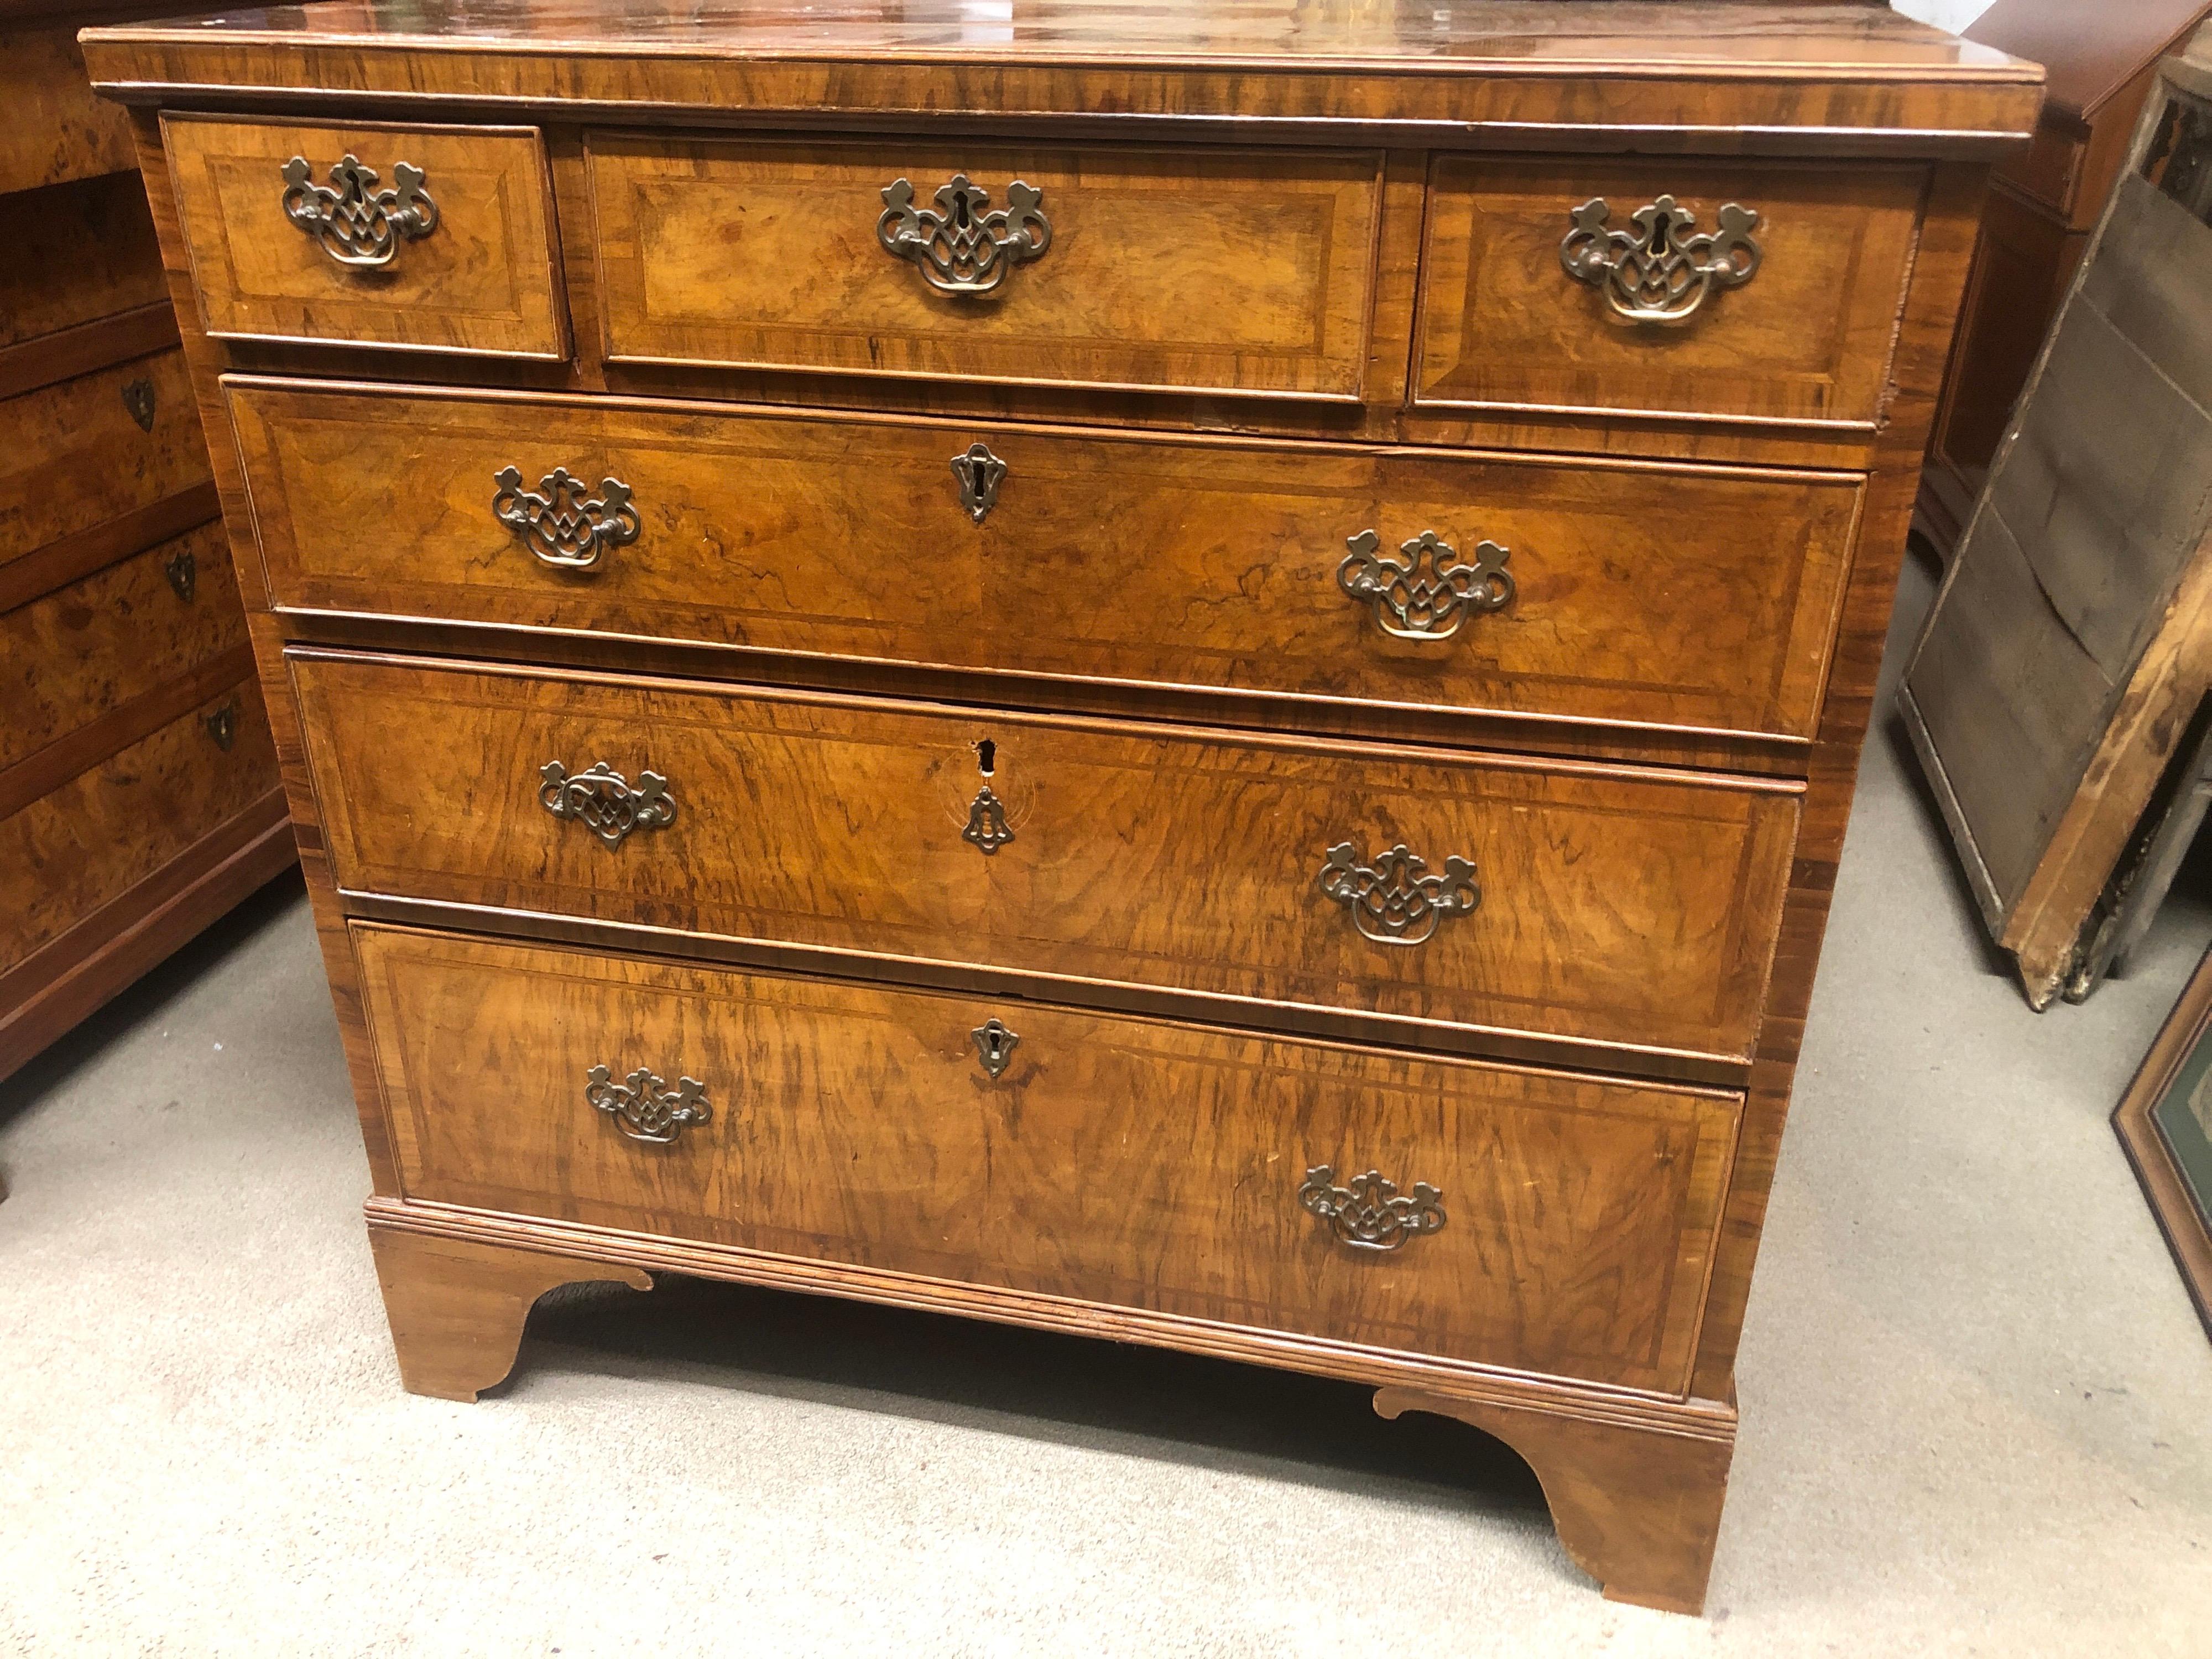 Queen Anne style dressers, of excellent workmanship and proportions, furniture of well-off family origin and commission, were made by good cabinetmakers in high skill workshops. In fine walnut wood and brass applications, as usual on this style of